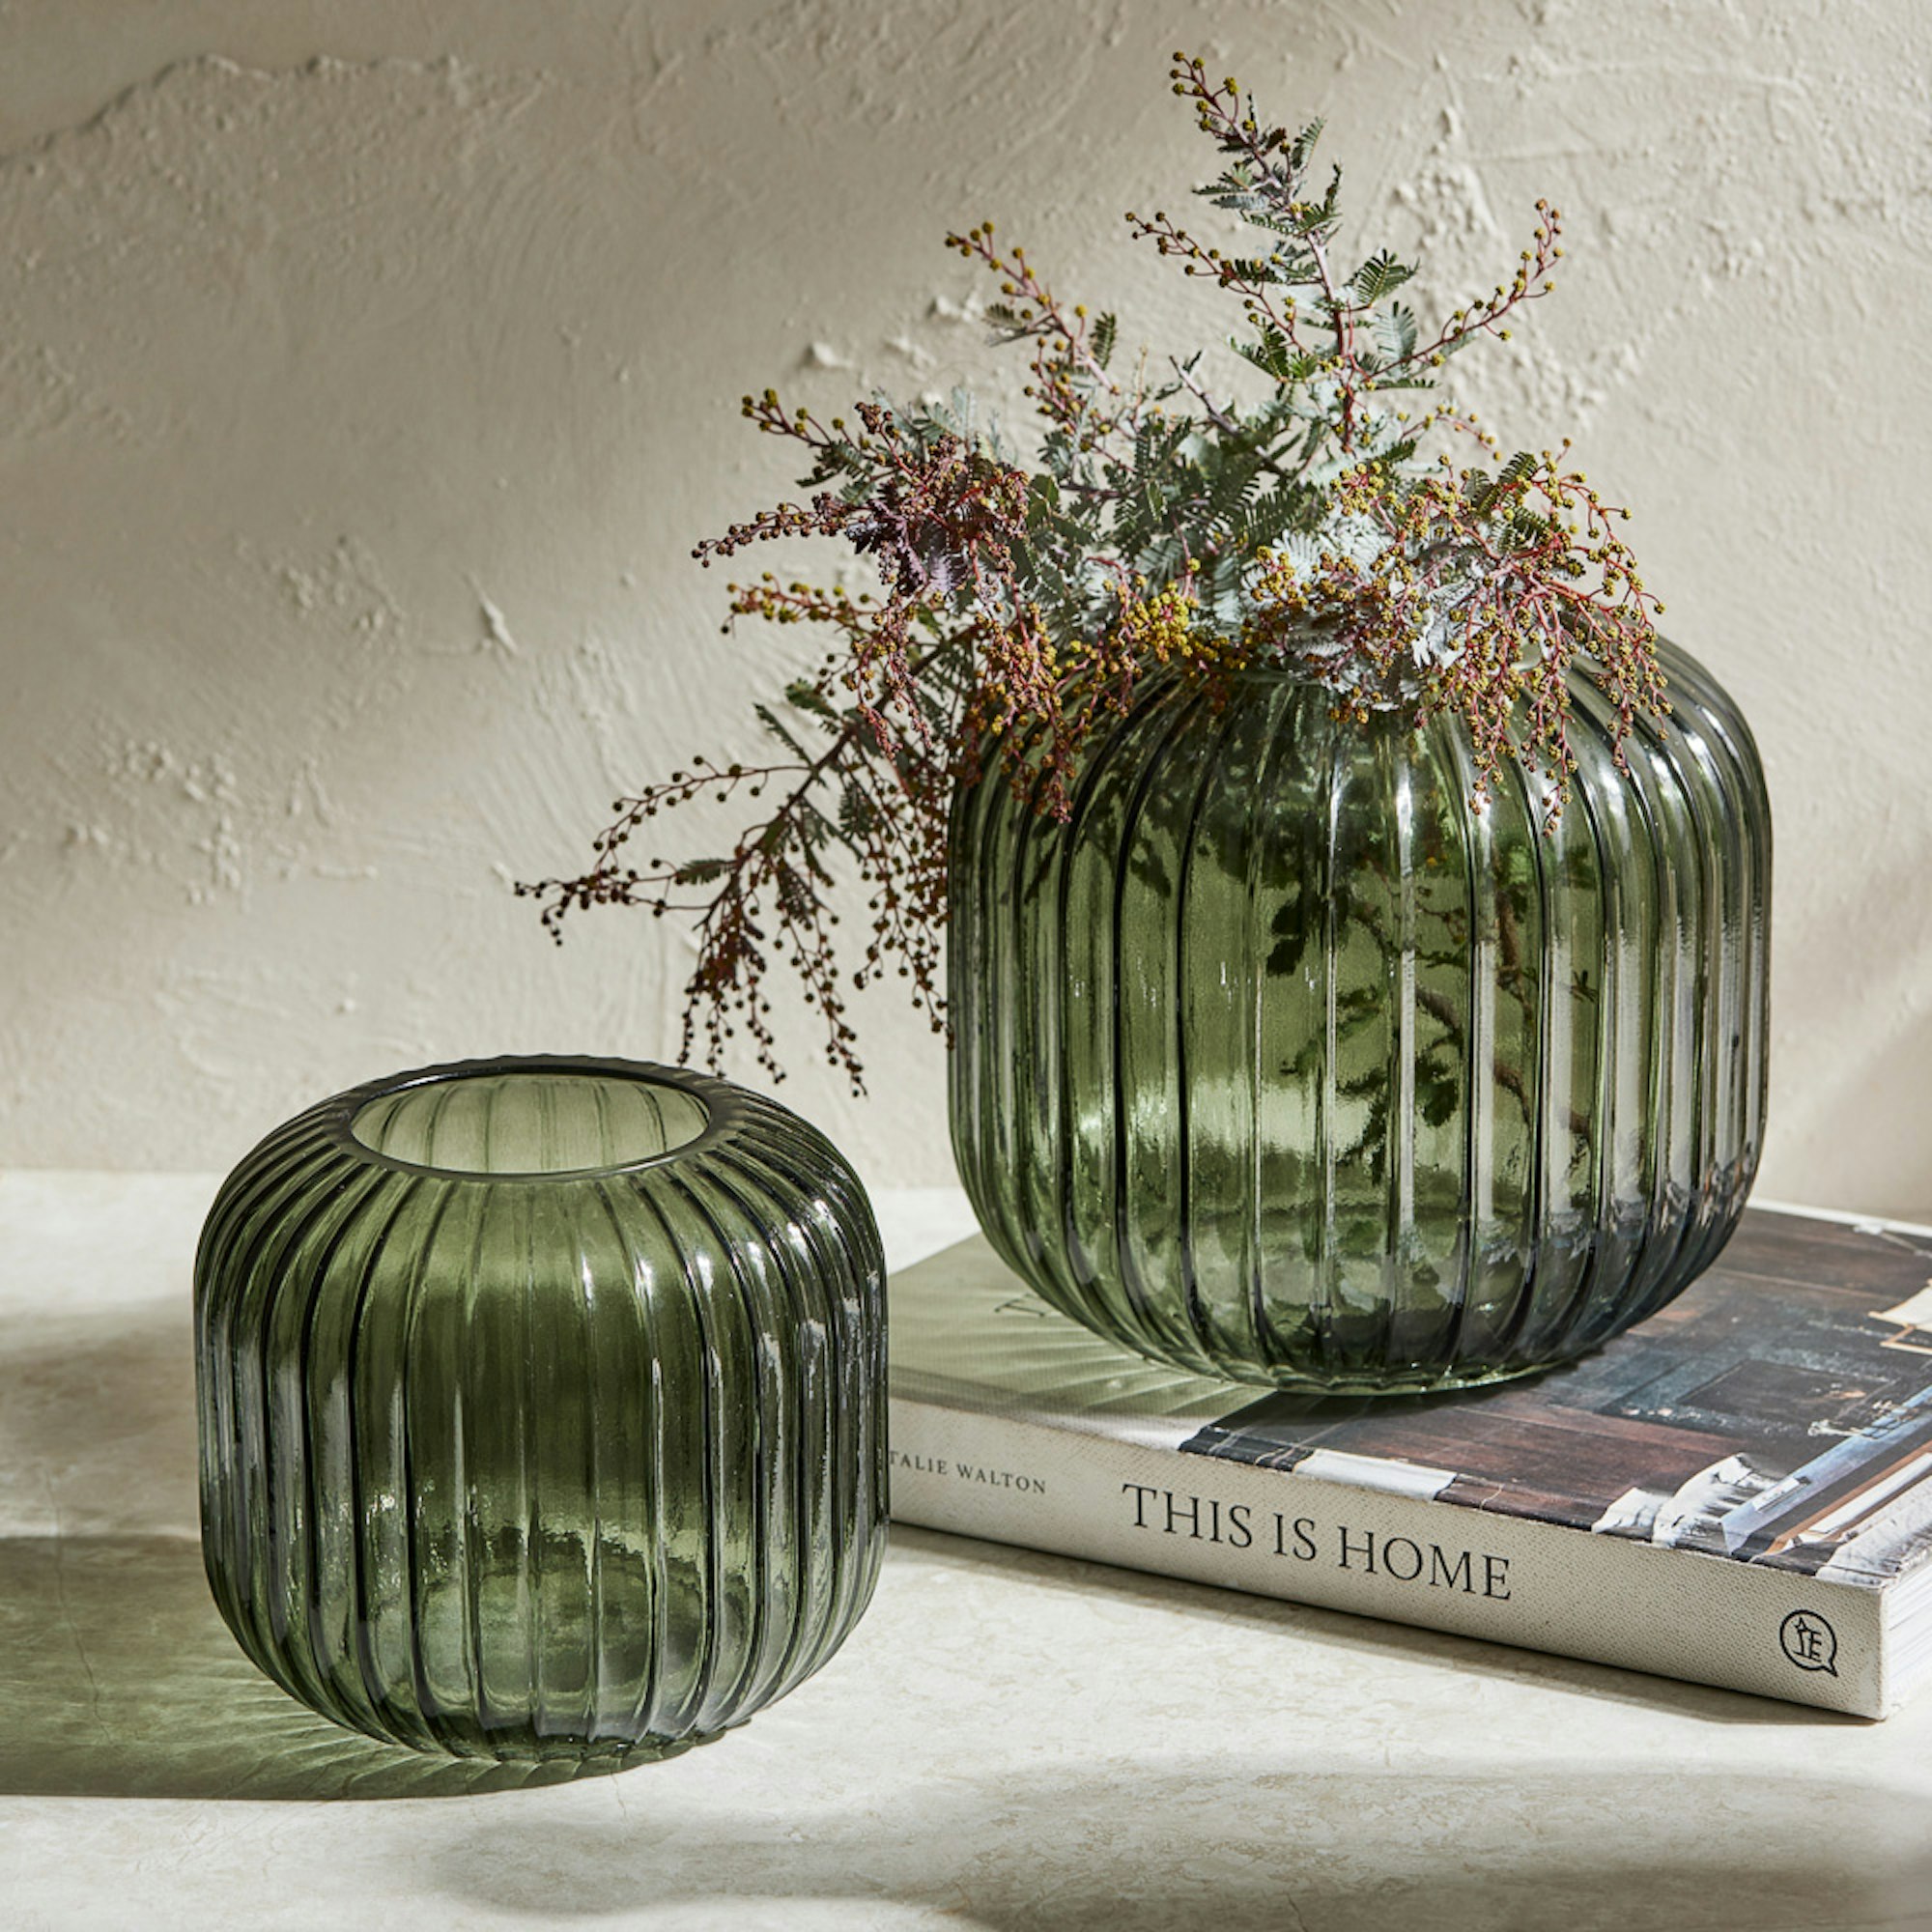 MyHouse SS23 collection. Two ribbed green vases with flowers sitting on books.